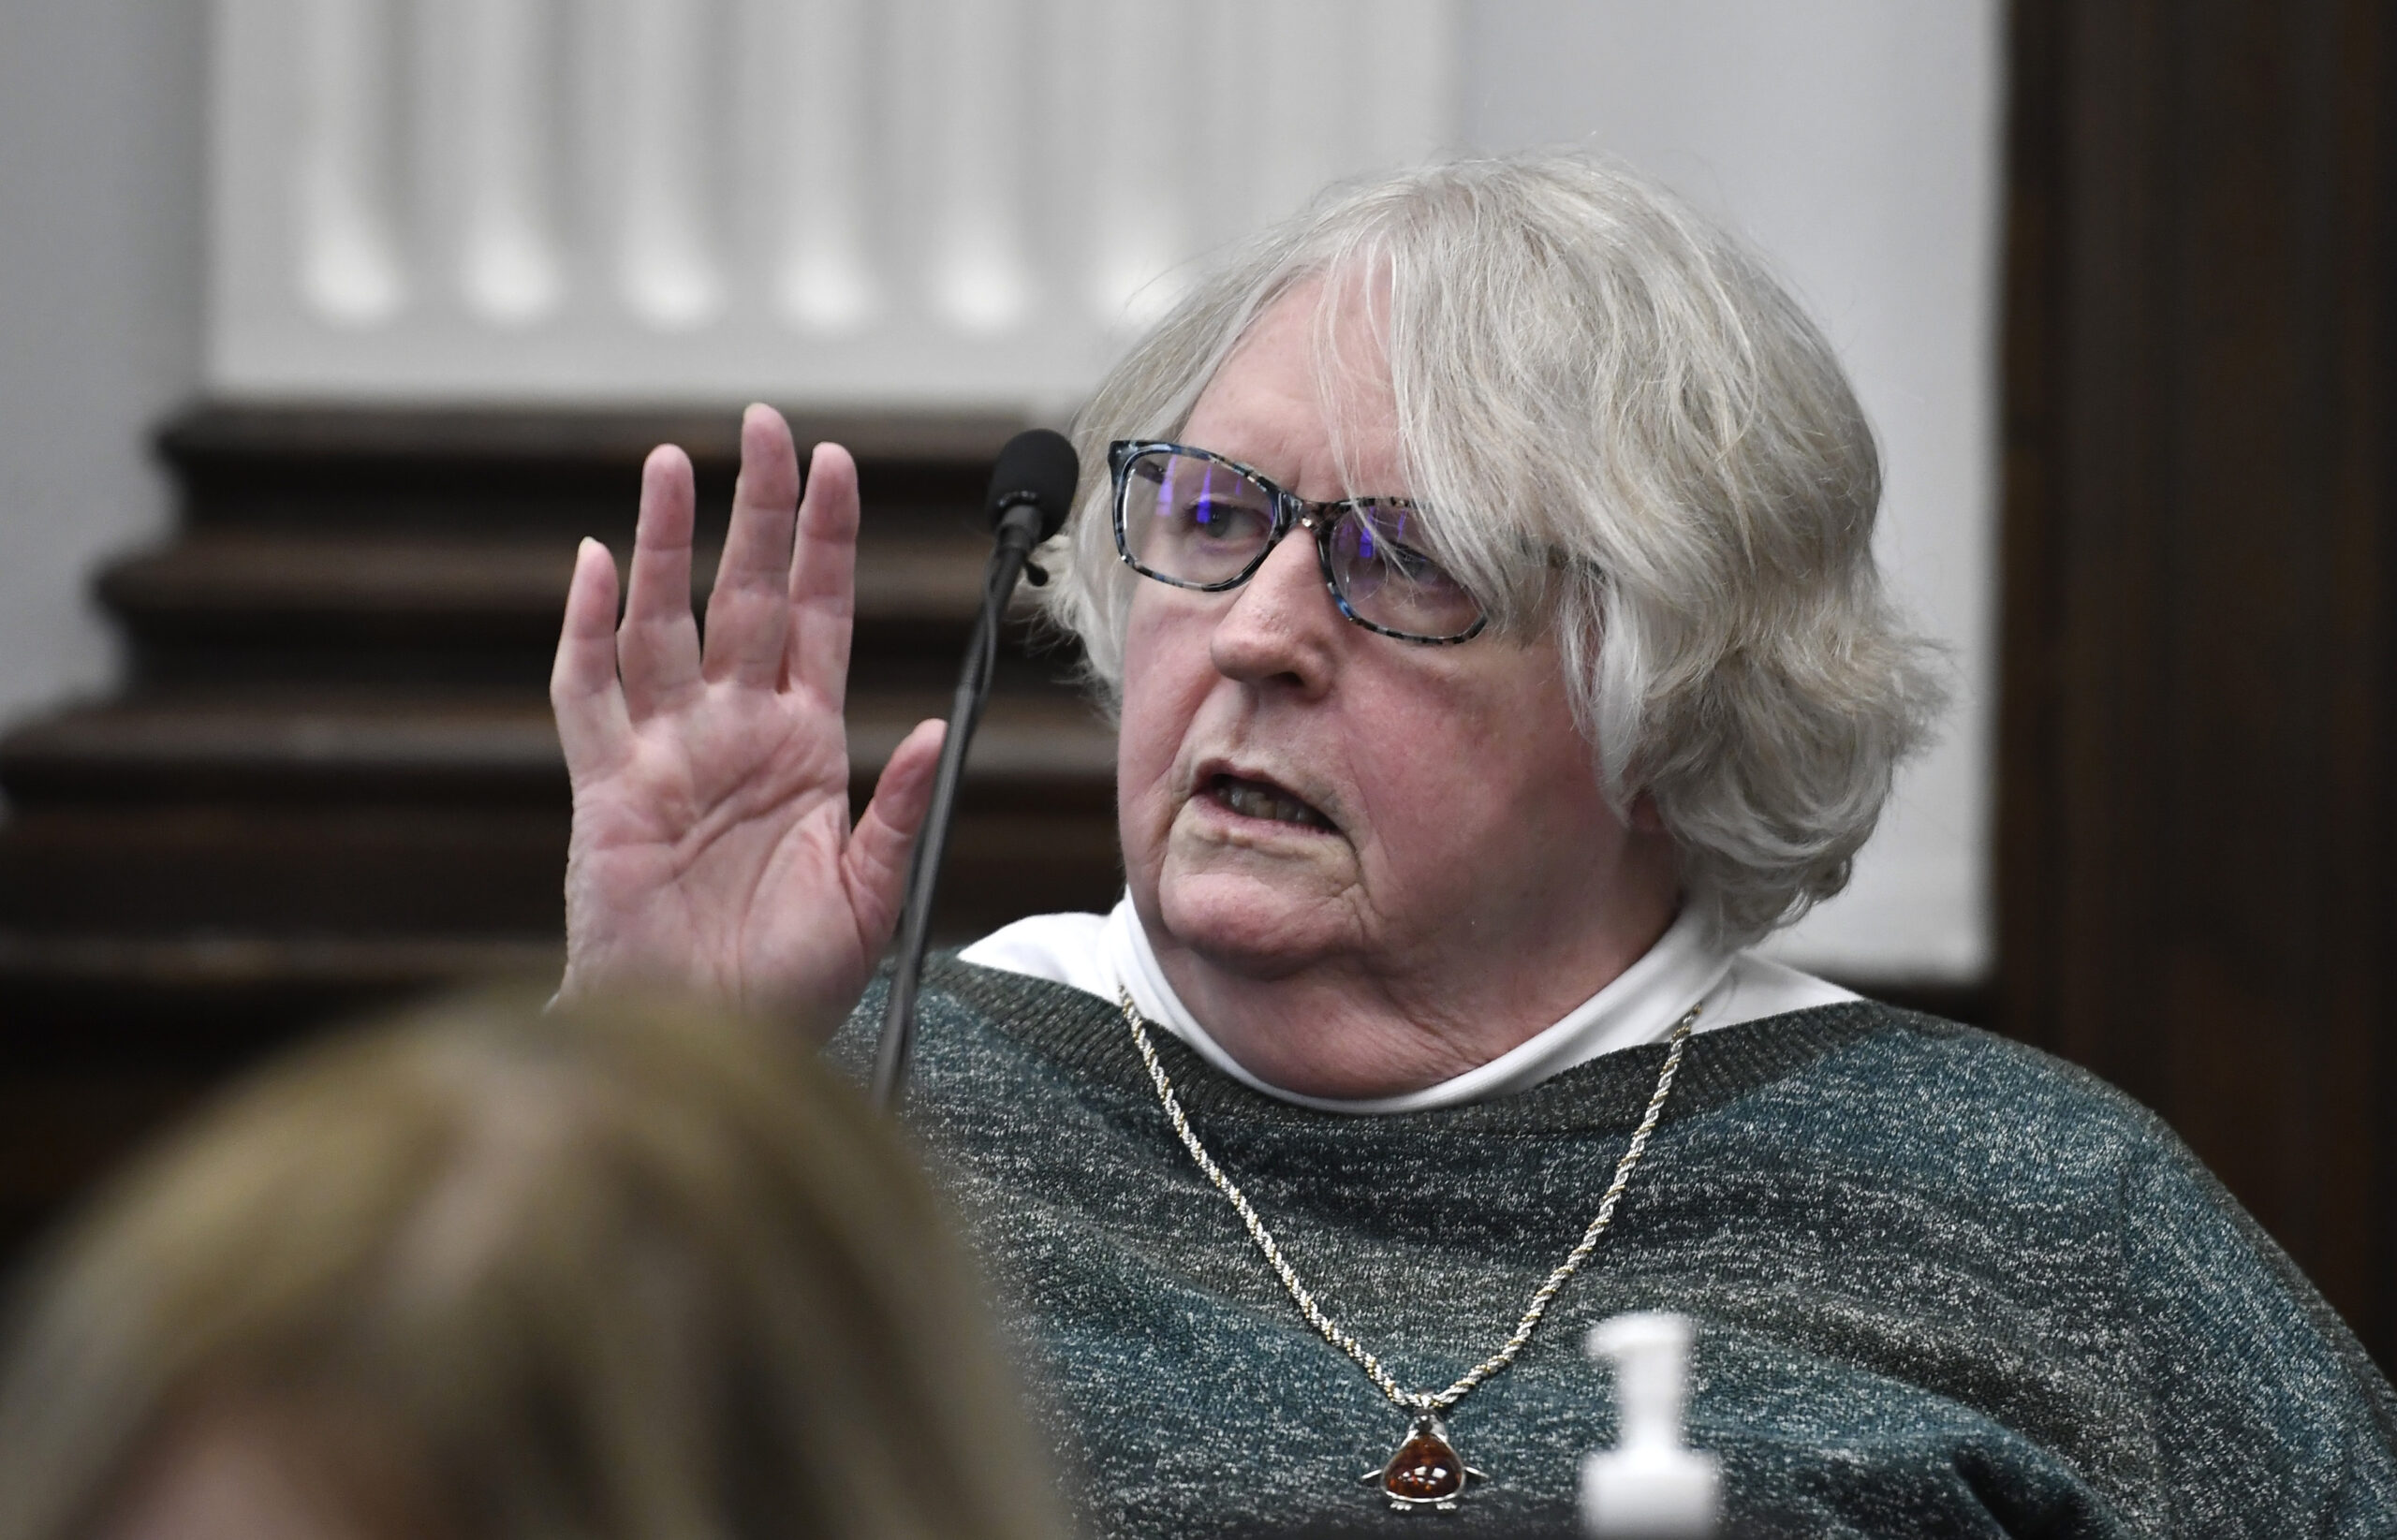 Susan Hughes, the late Anthony Huber's great aunt, is sworn in during Kyle Rittenhouse's trial